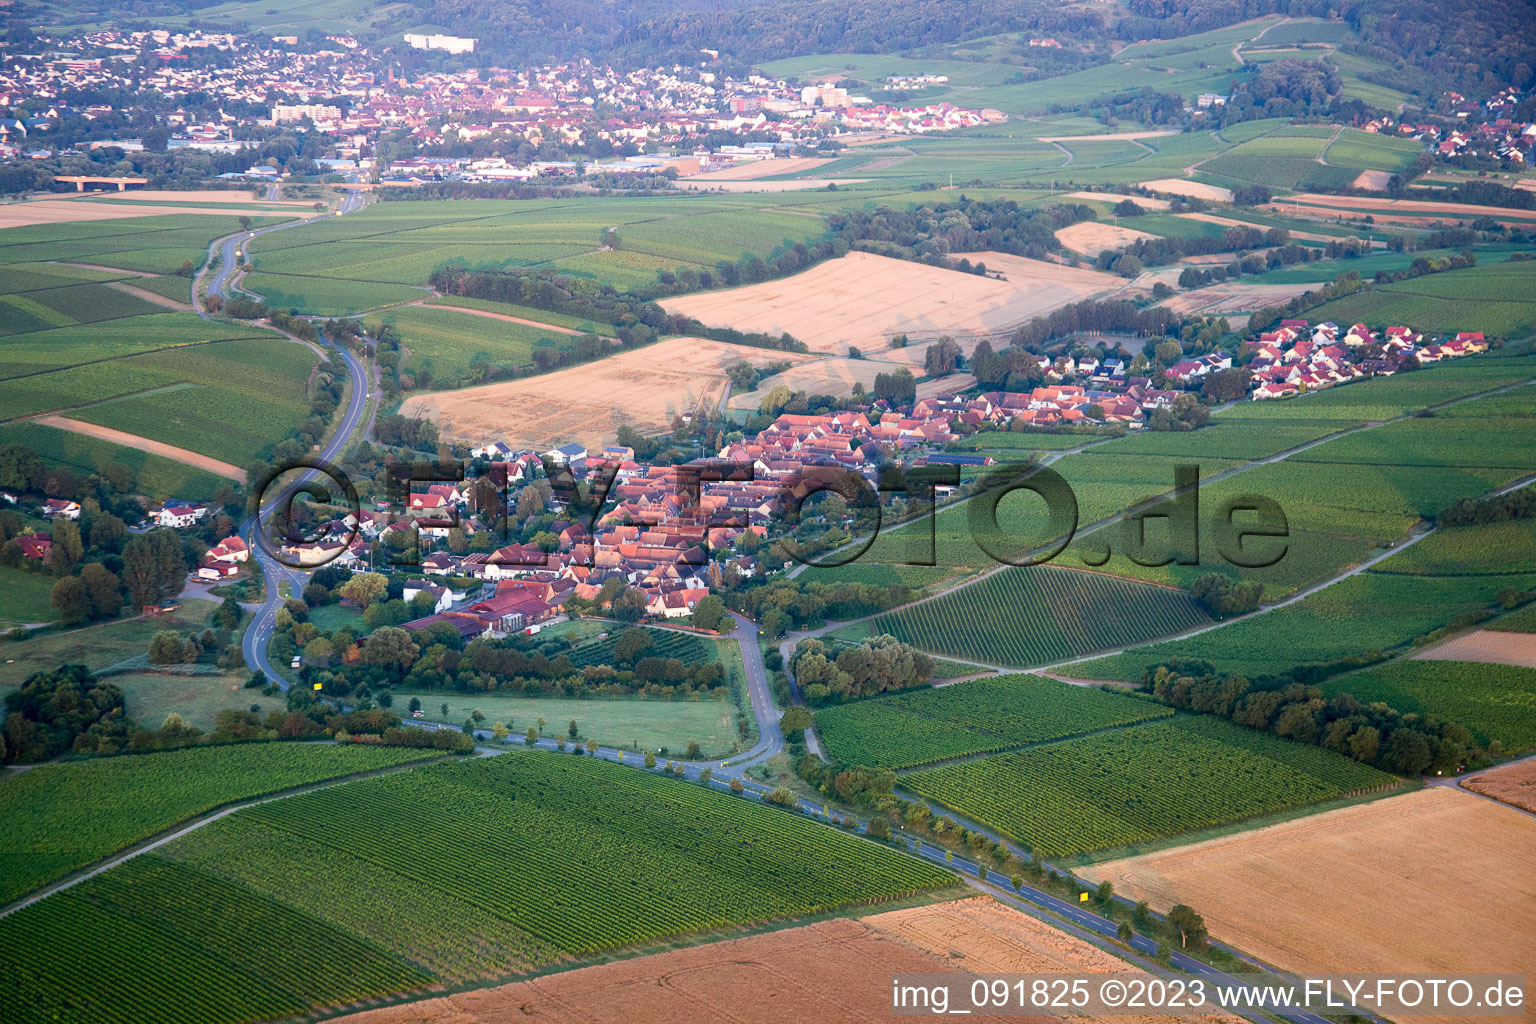 Drone image of Niederhorbach in the state Rhineland-Palatinate, Germany